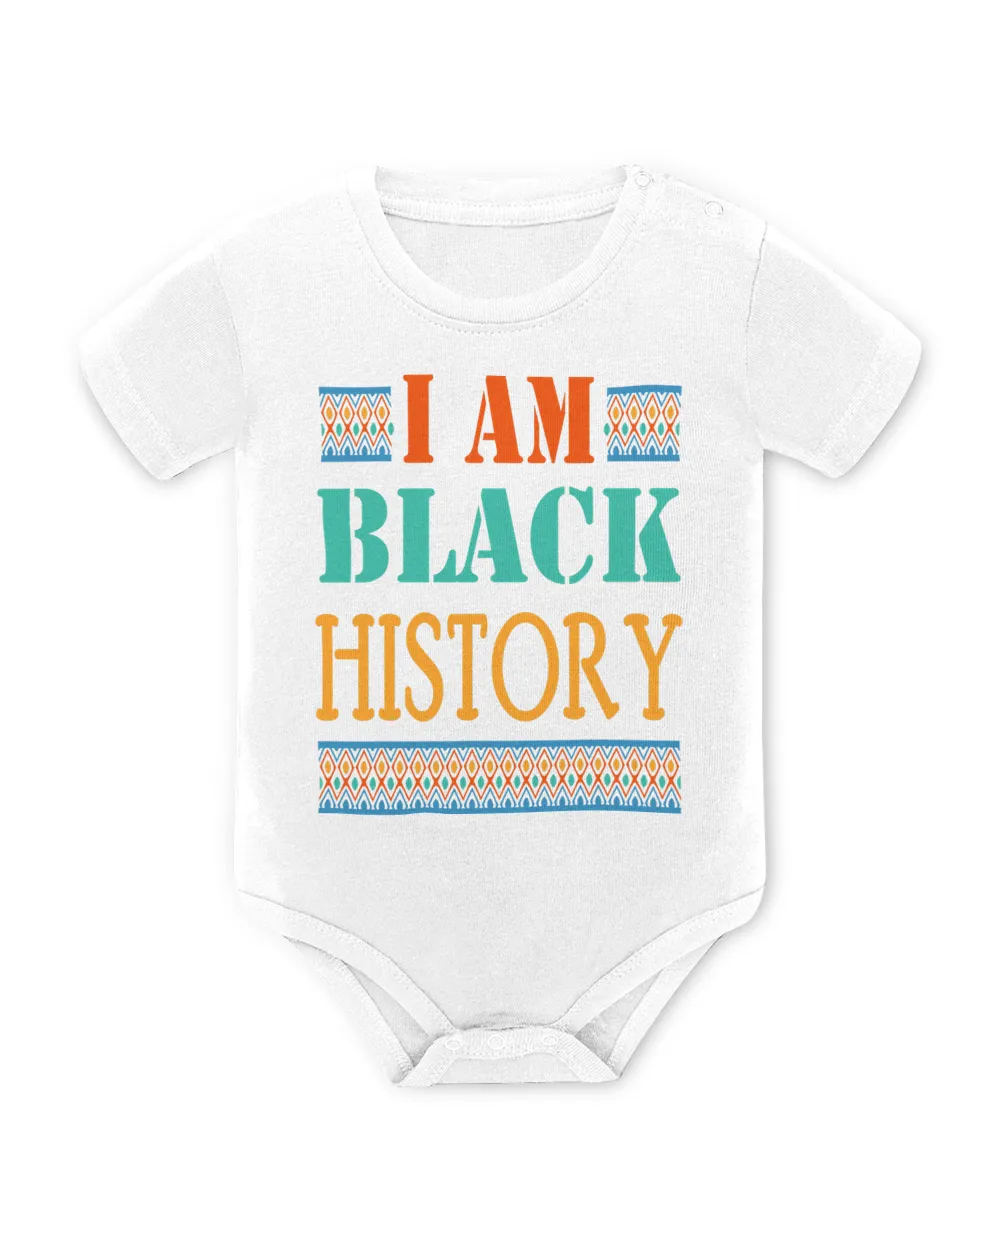 I Am Black History Month Shirt for Toddlers Kids Youth Teens